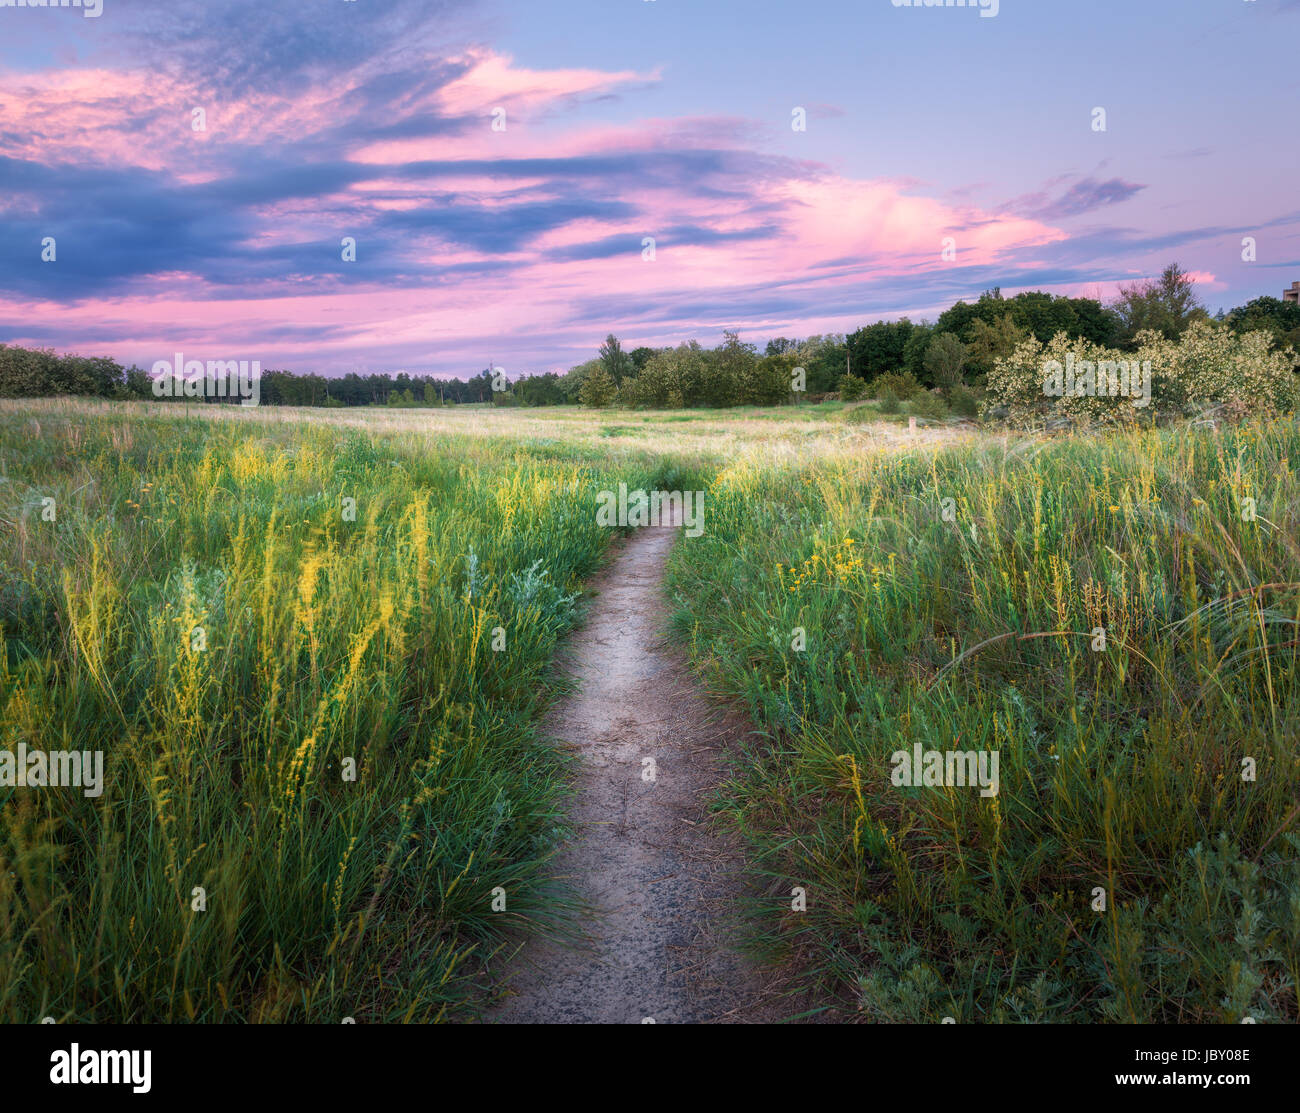 Amazing walkway through grass field at sunset. Colorful summer landscape with blooming green grass, trail, beautiful blue sky with pink clouds at dusk Stock Photo